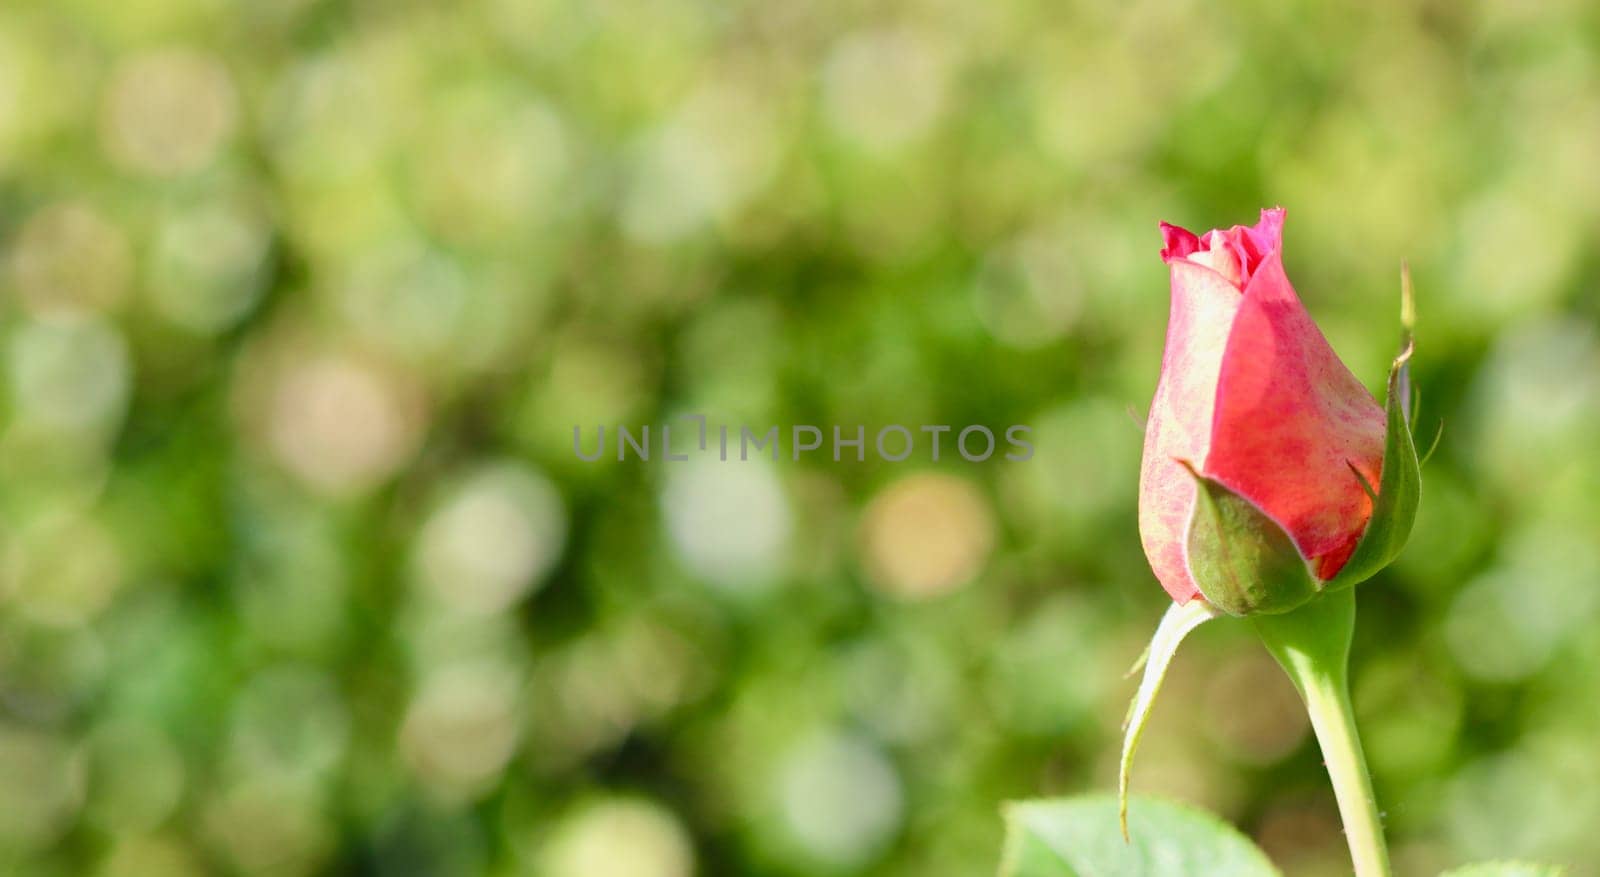 Beautiful red yellow rose bud on a green background in the garden. Ideal for a greeting cards